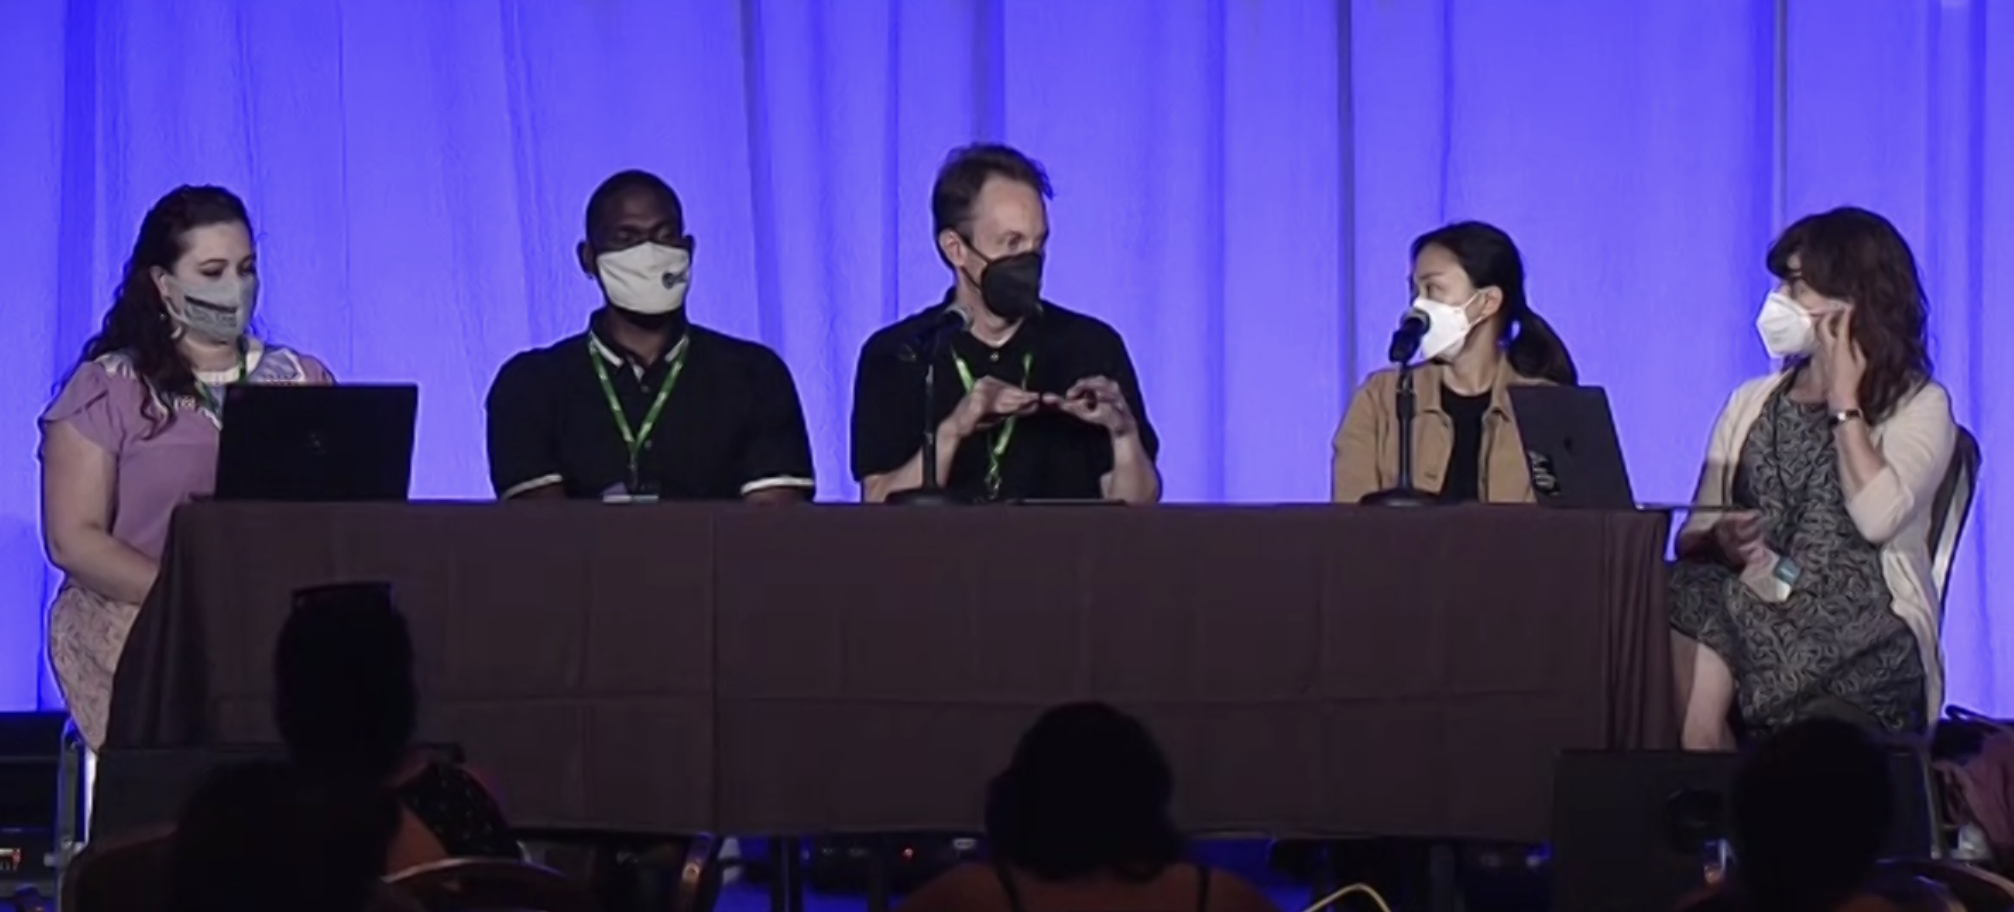 Screenshot of five people sitting on stage at a table.